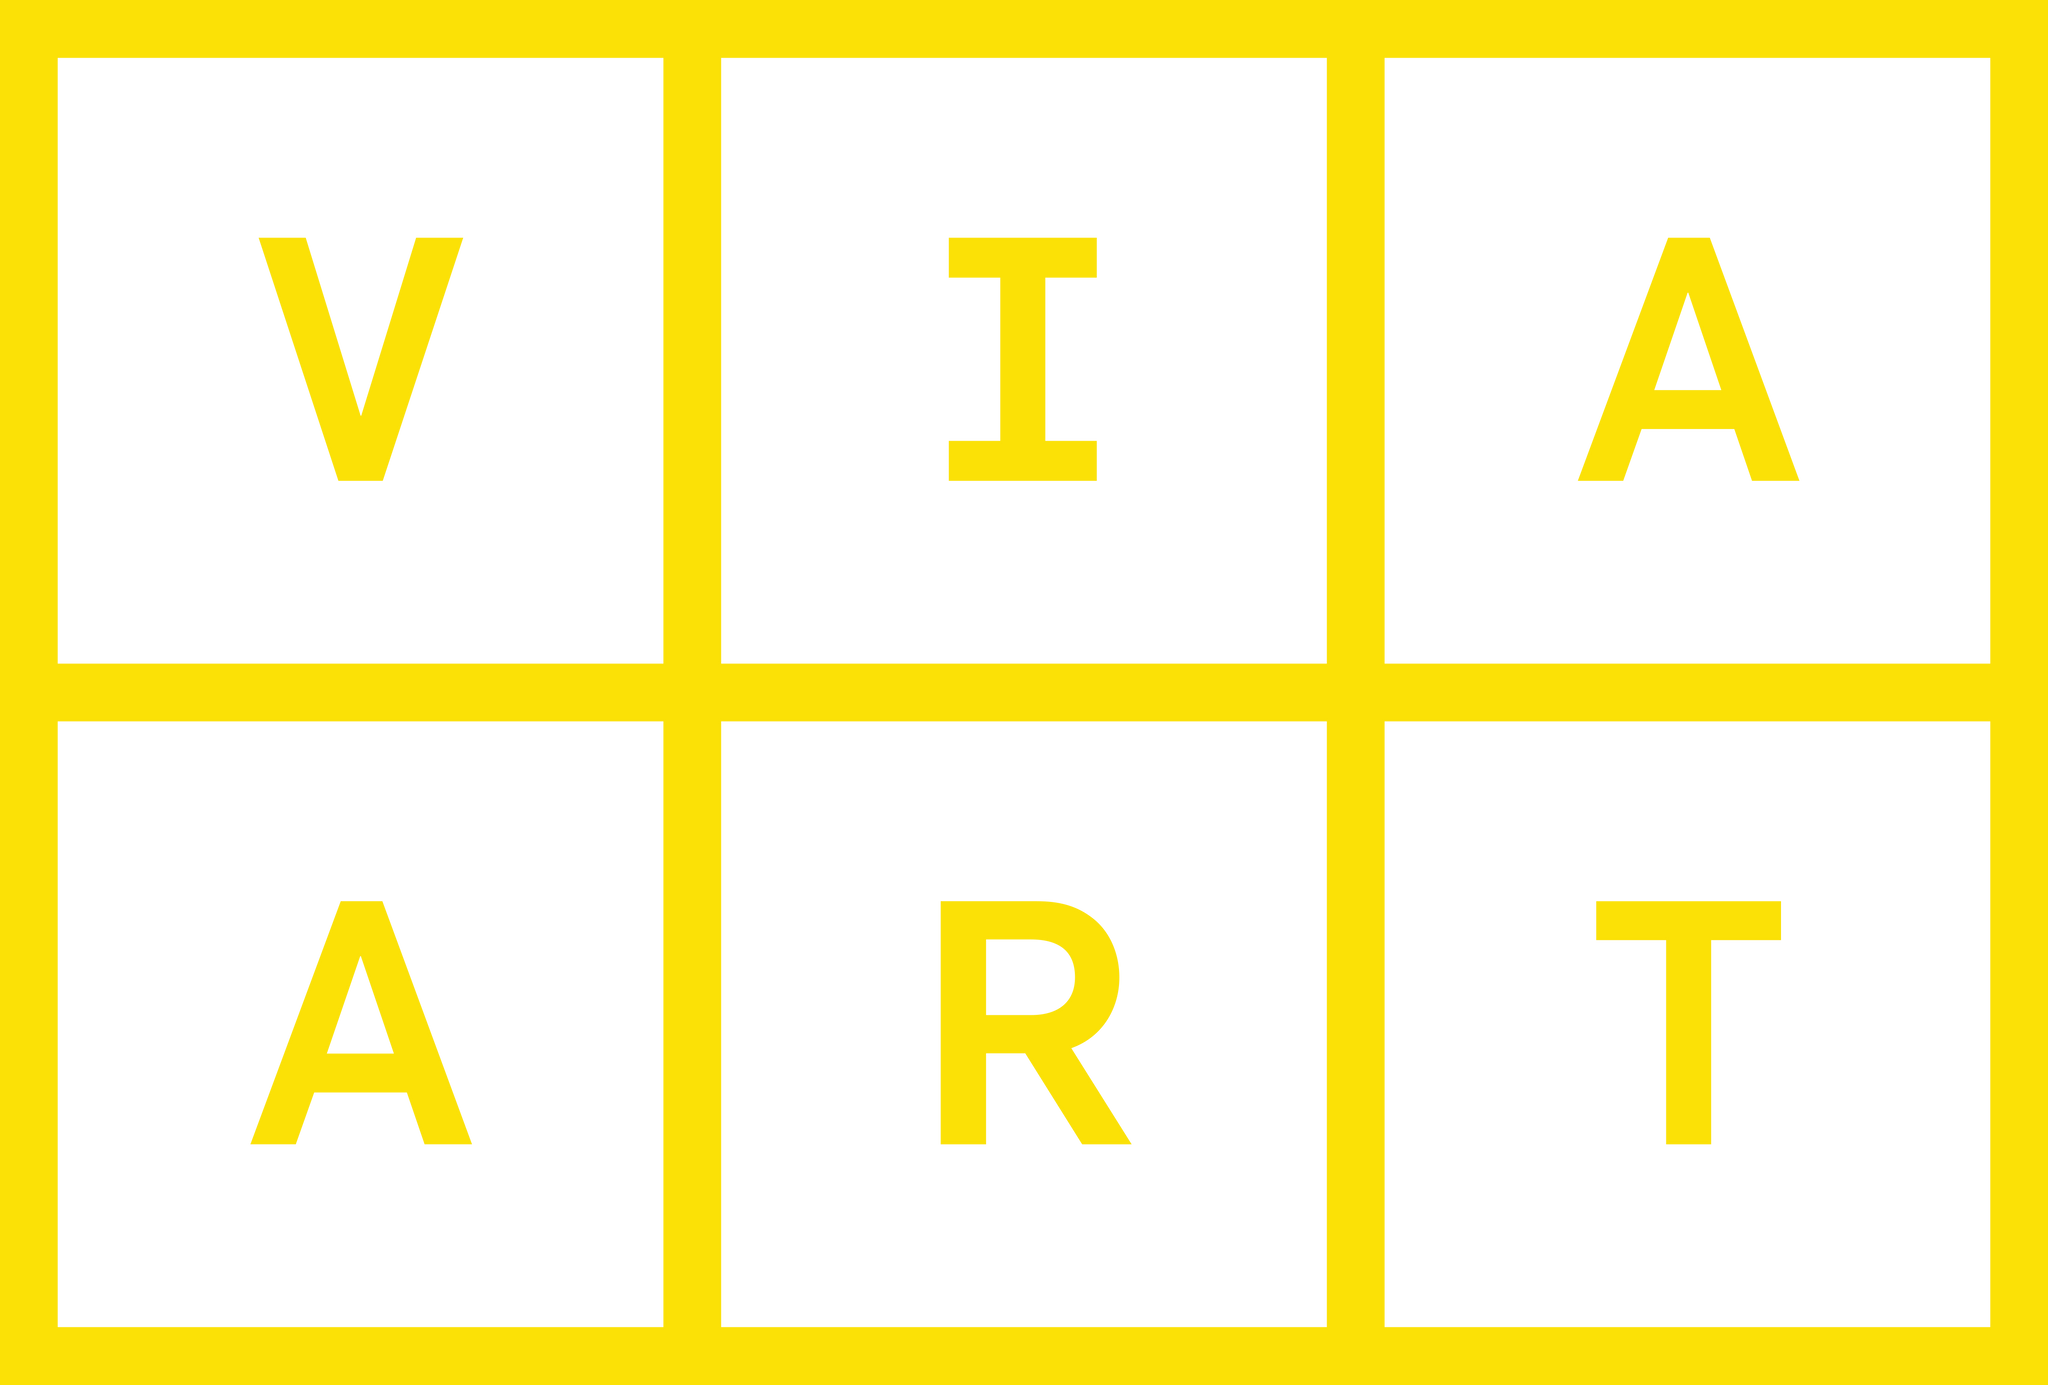 Via Art's logo: a rectangular yellow grid with one letter of the name in each square of the grid